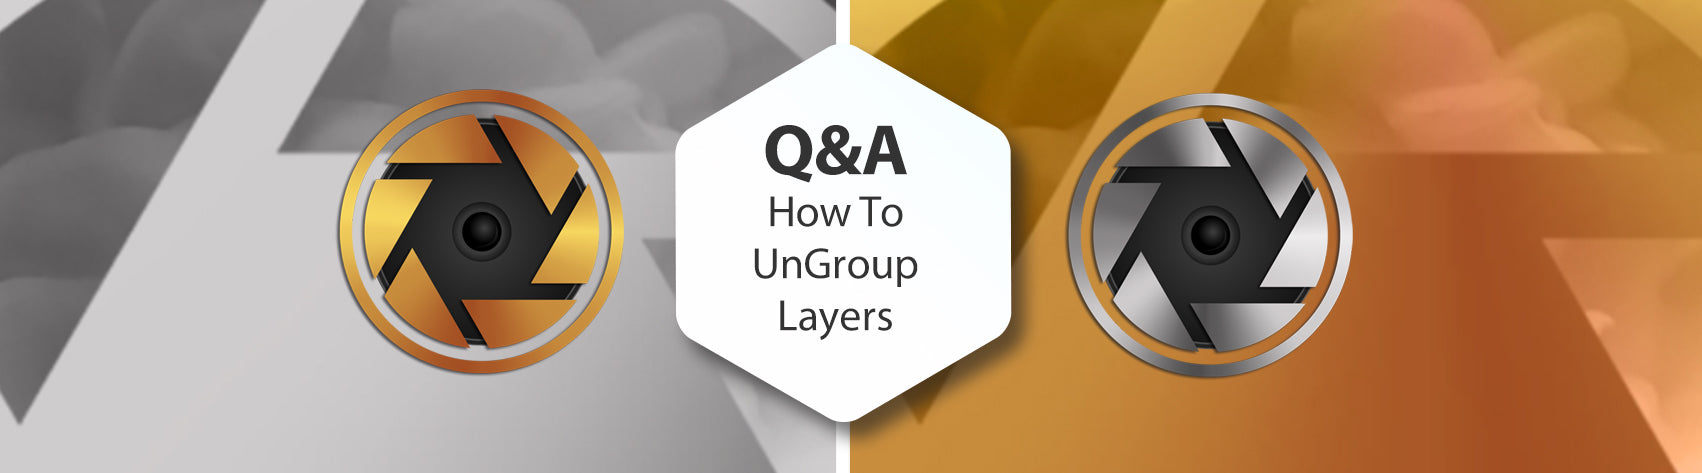 Q&A - How To Un-Group Layers